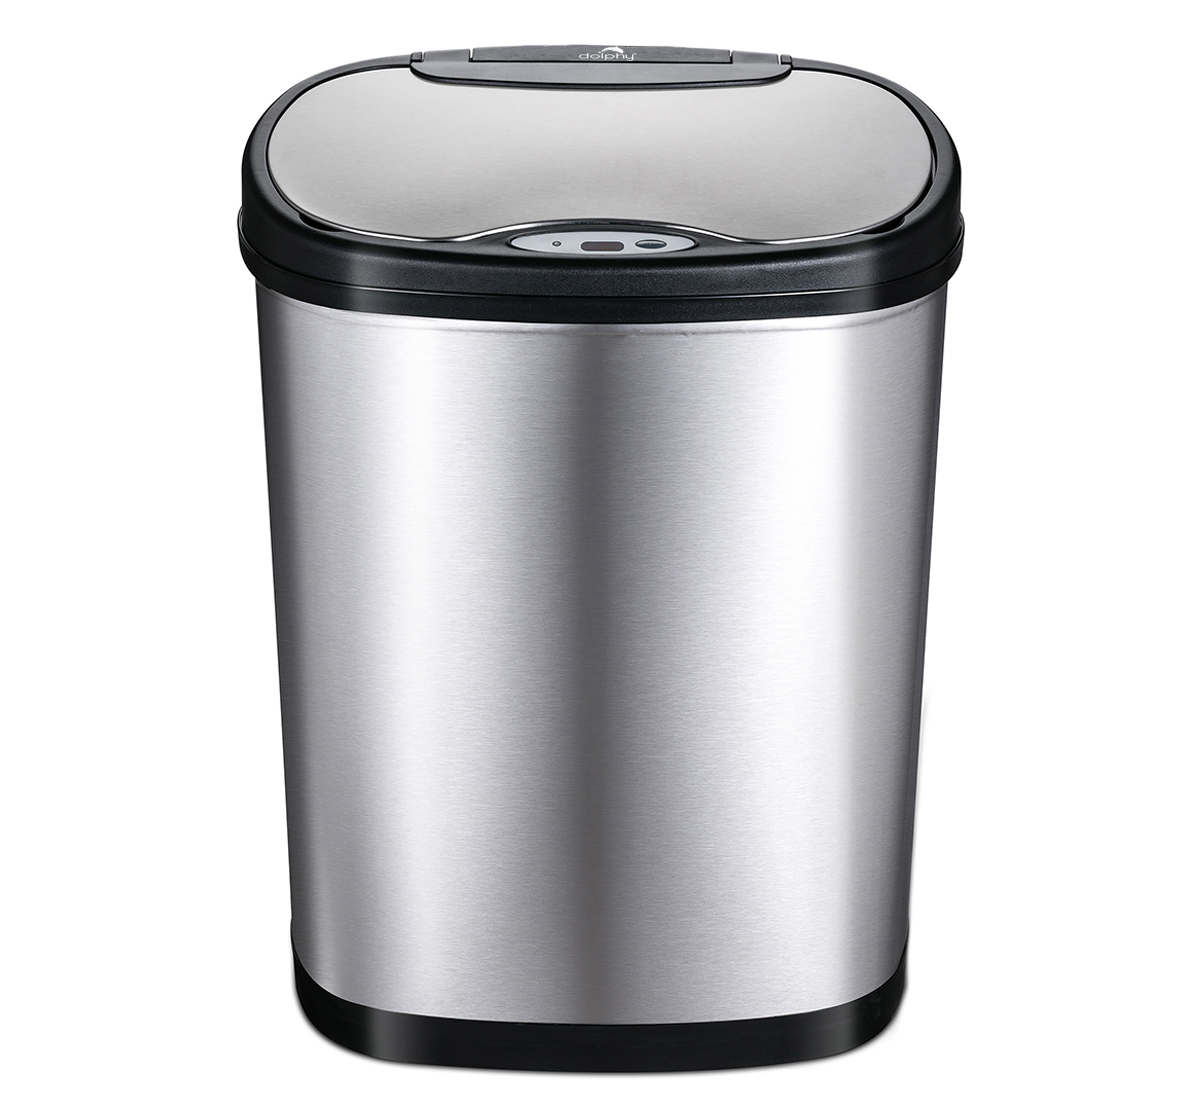 42L Automatic High Tech Stainless Steel Trash Bins
